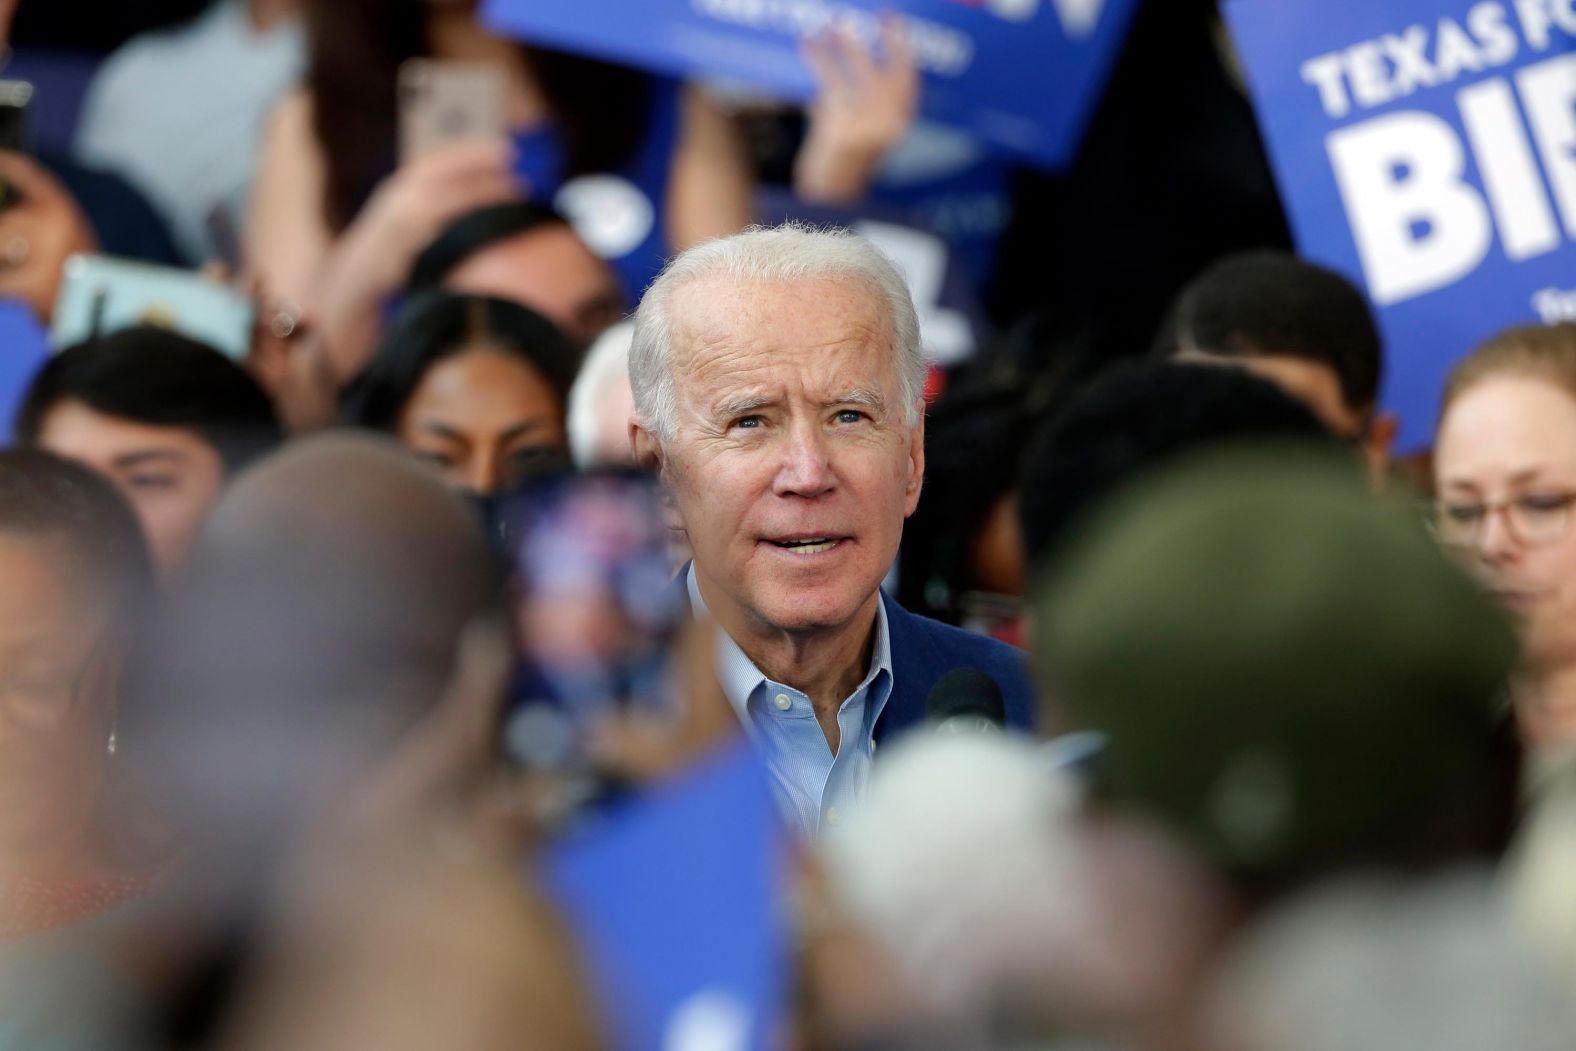 Biden attends a campaign rally in Houston on Monday.